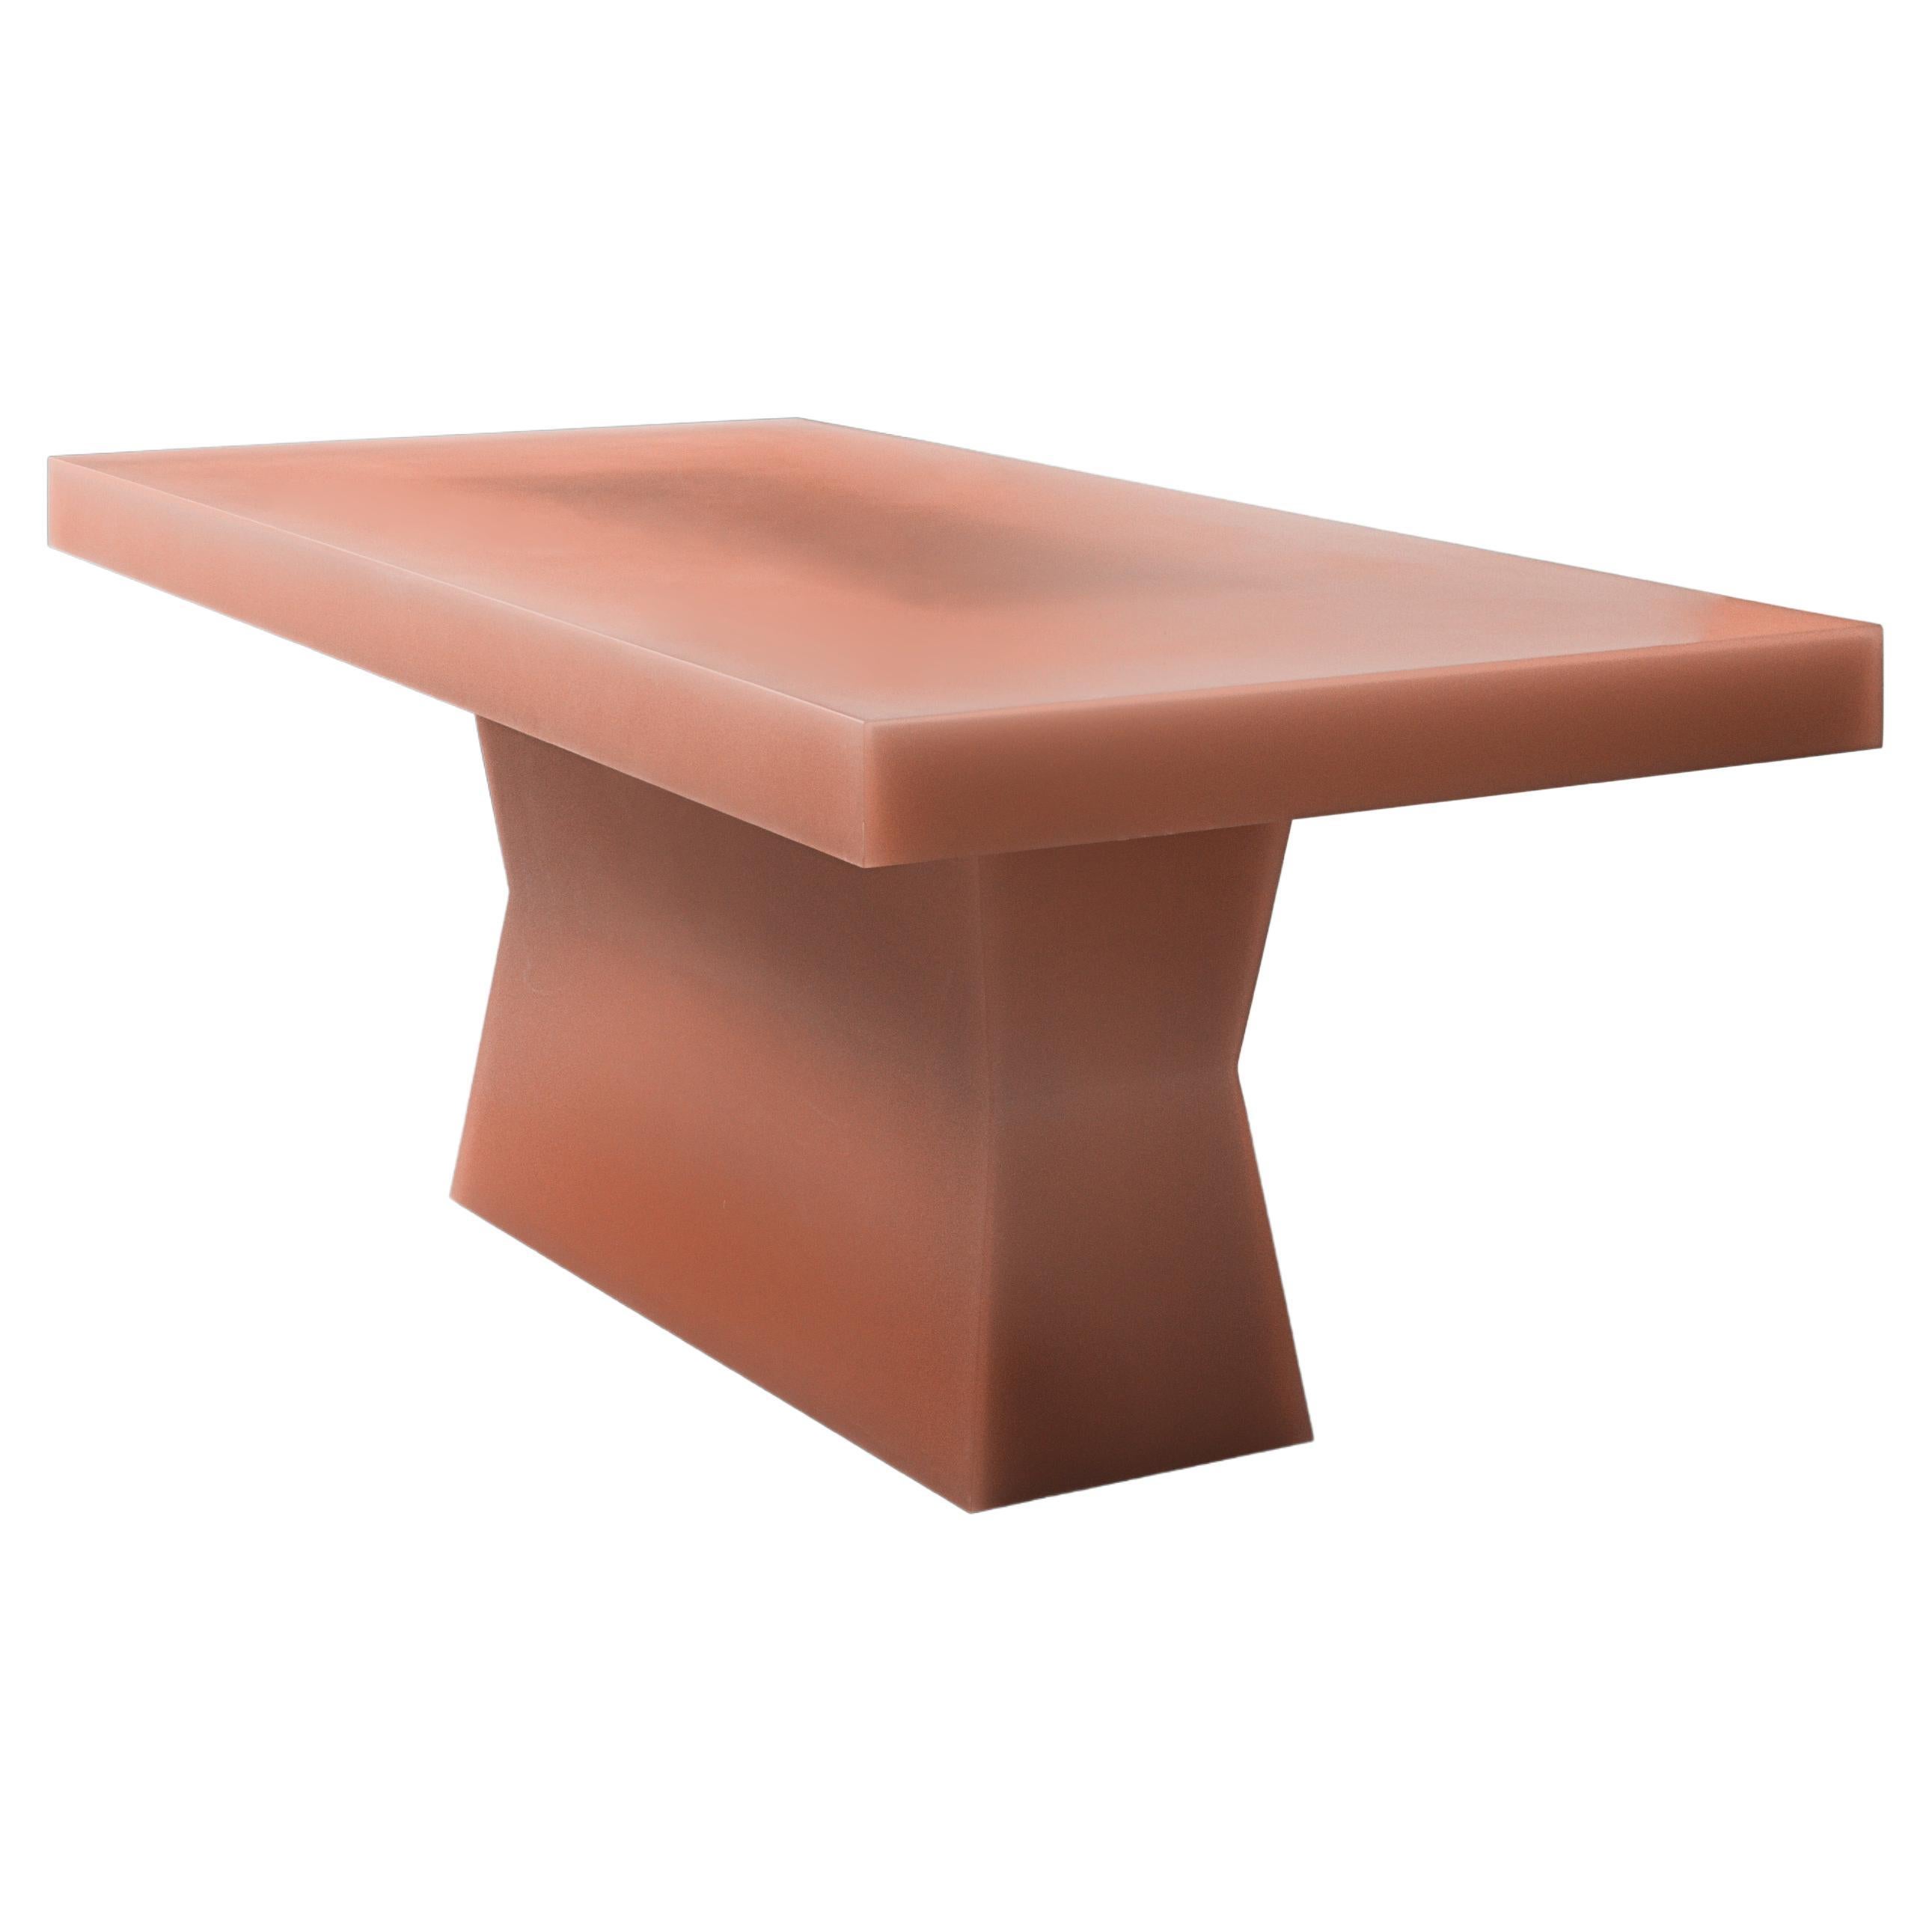 Pool Resin Dining Table In Peach by Facture, Represented by Tuleste Factory For Sale